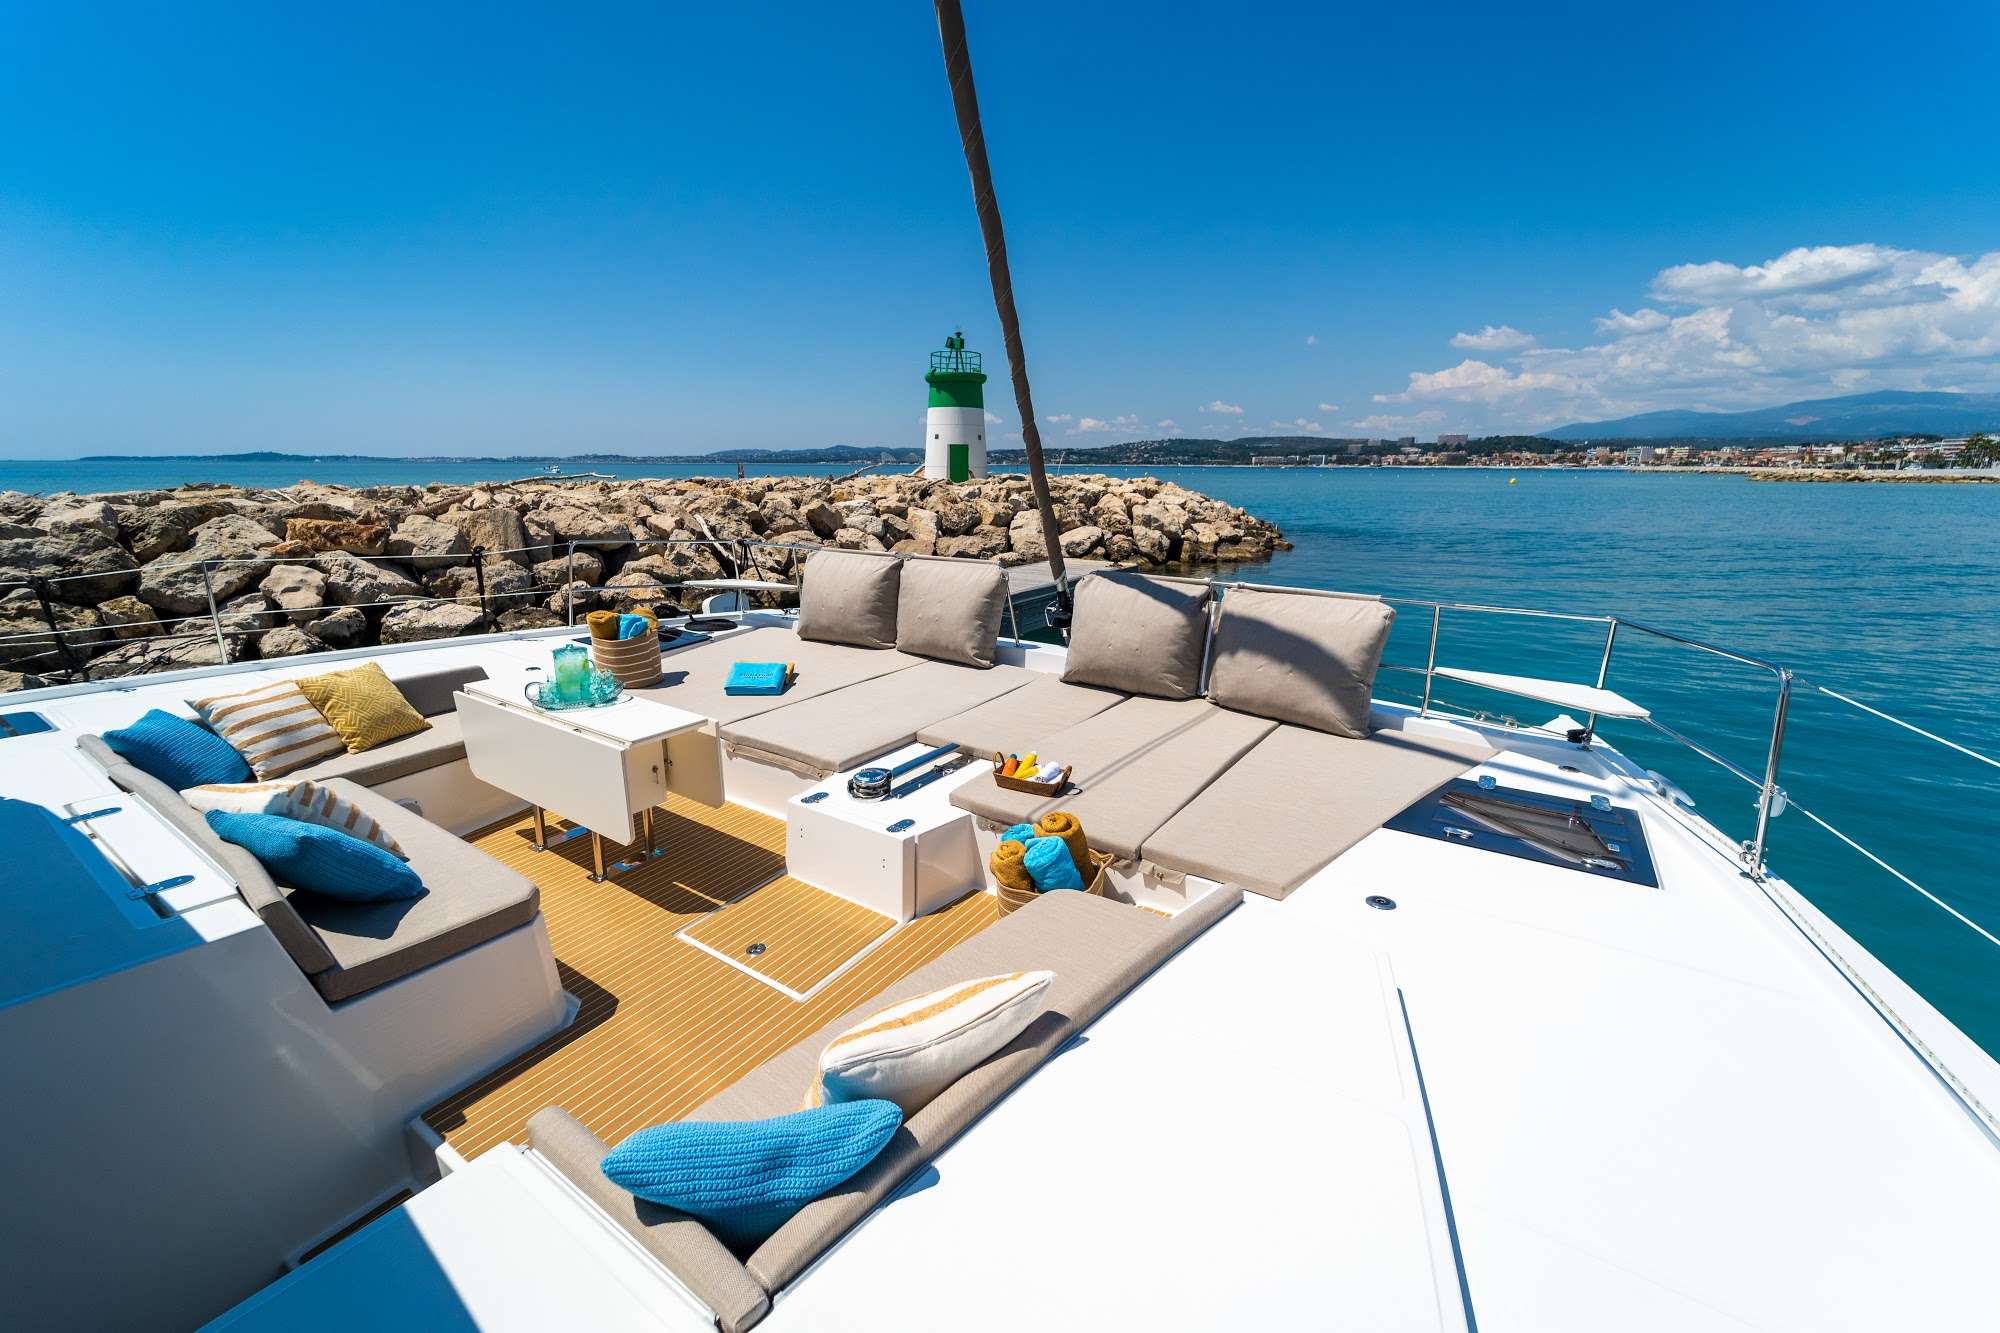 Signature Vision - Yacht Charter San Felice Circeo & Boat hire in Europe (Spain, France, Italy) 4